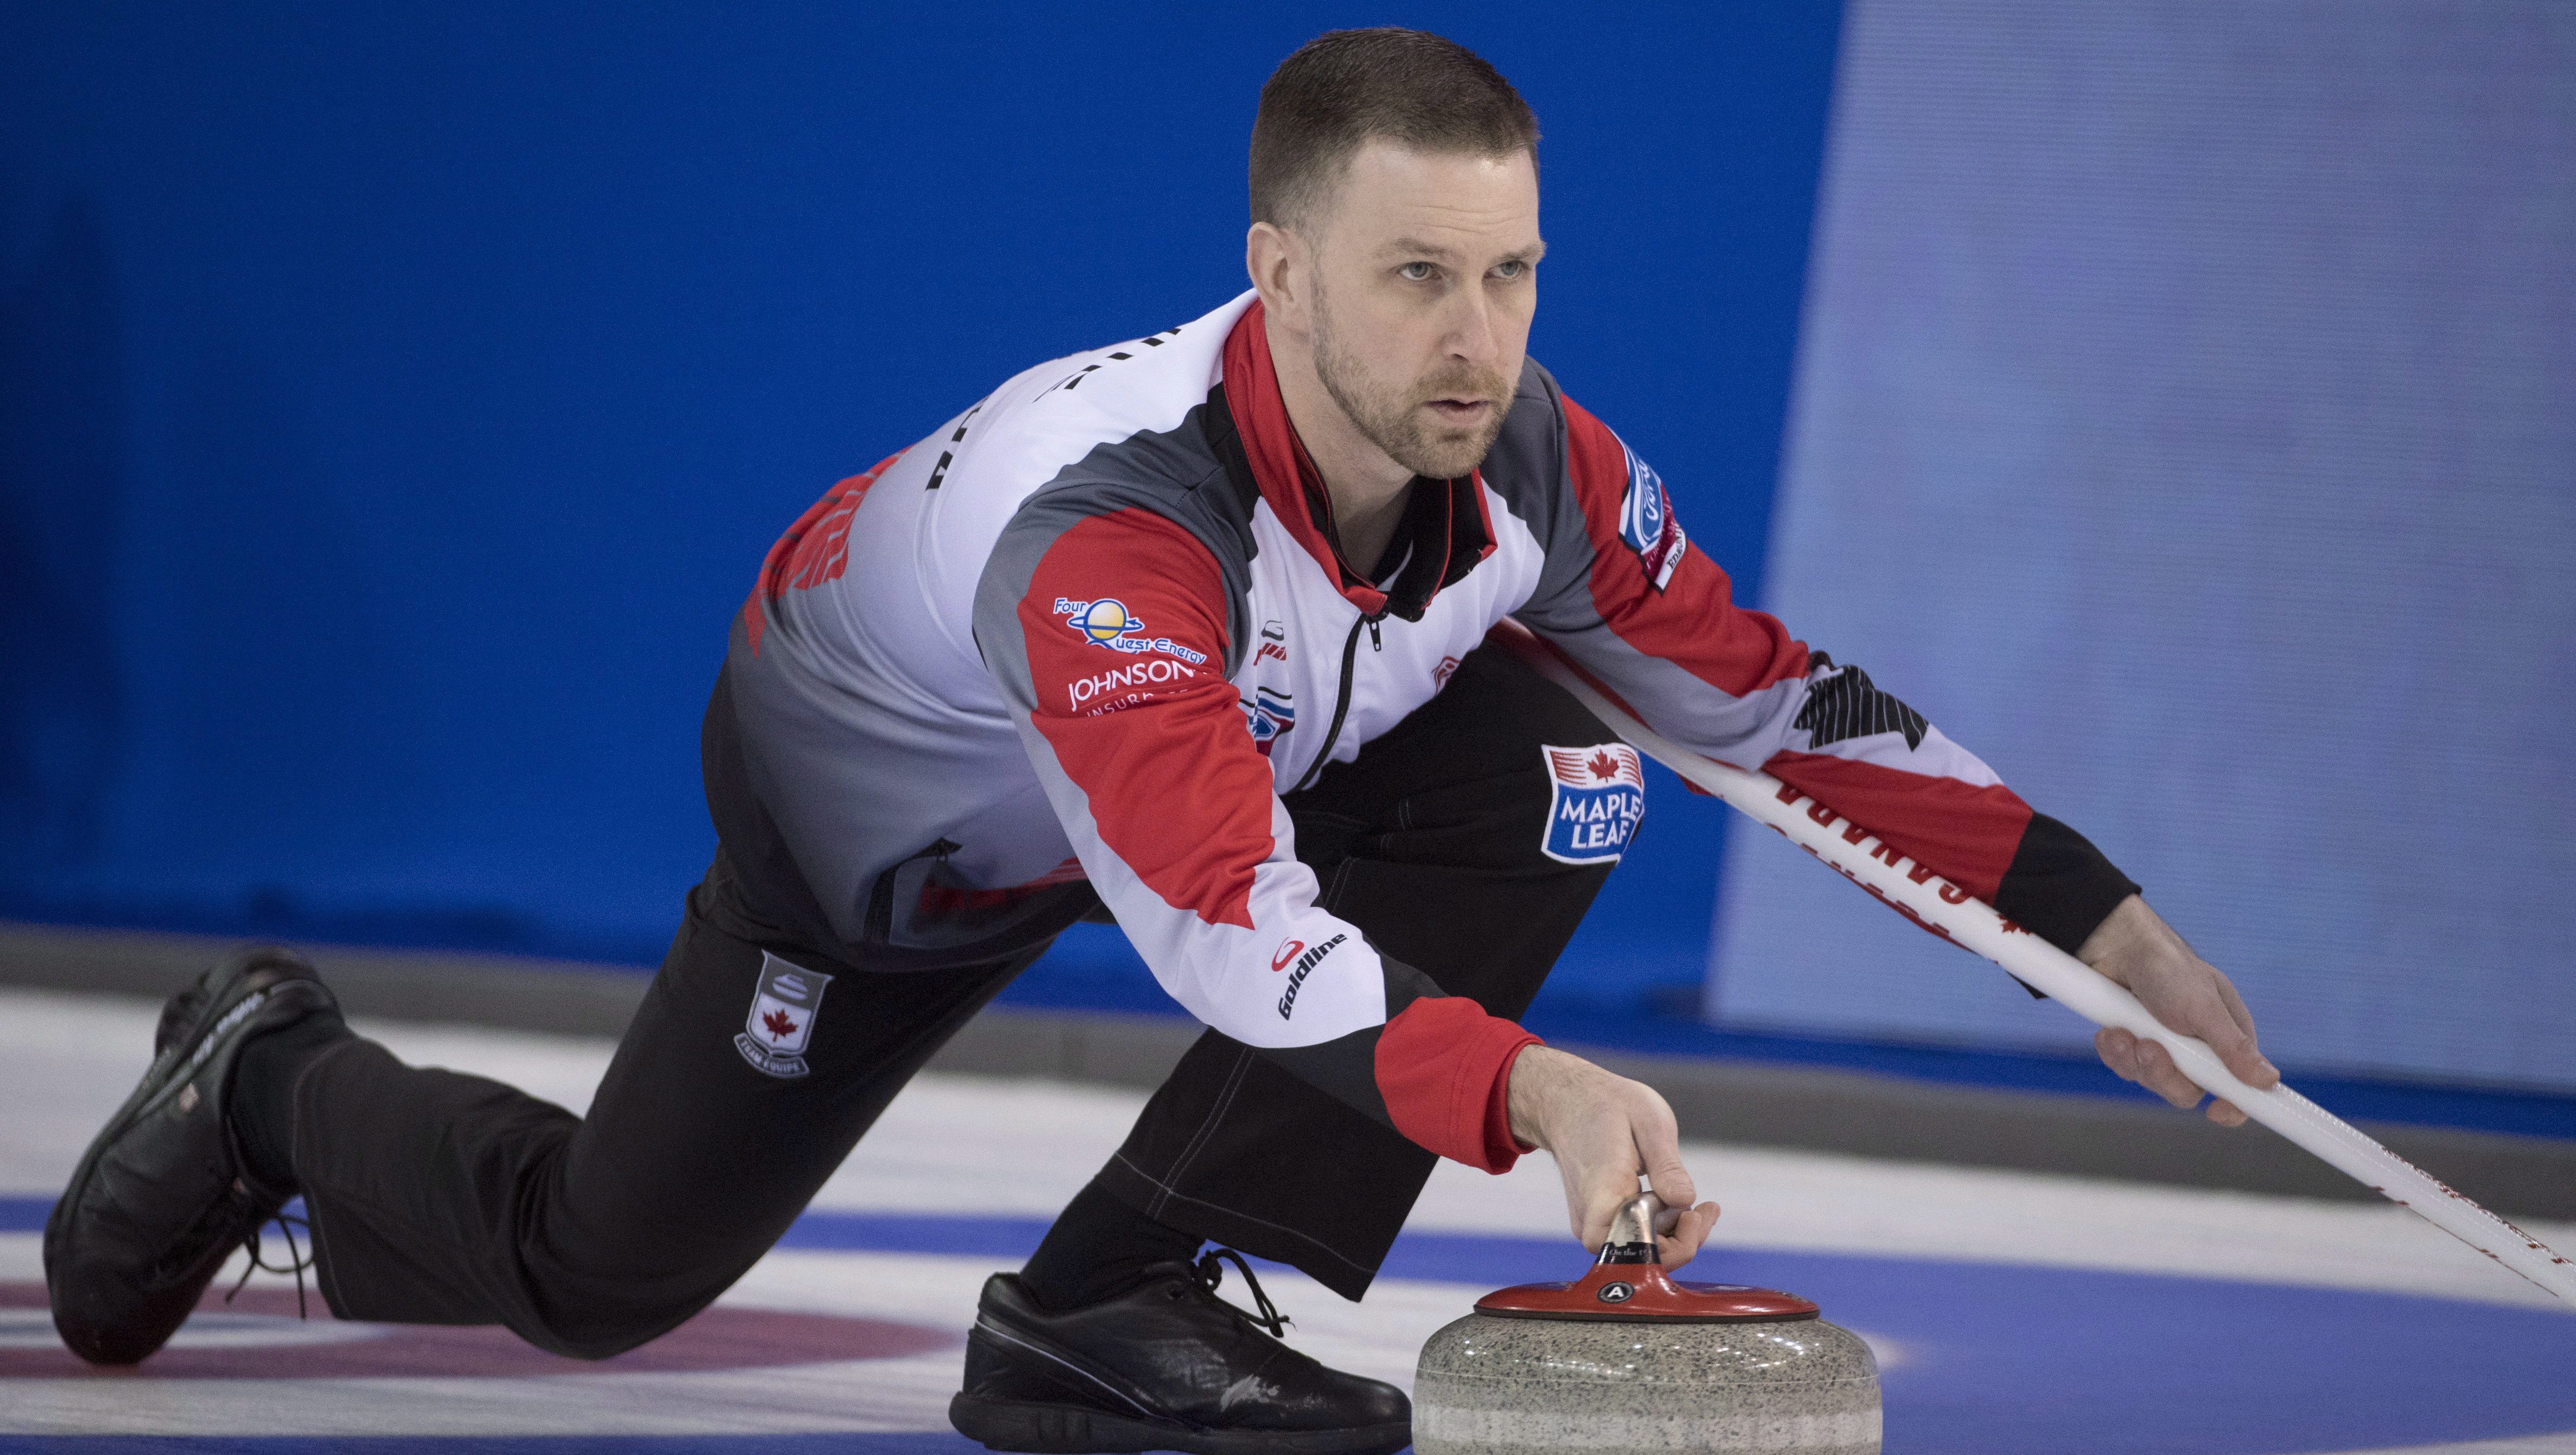 Team Canada undefeated, clinches playoff spot at men’s curling worlds